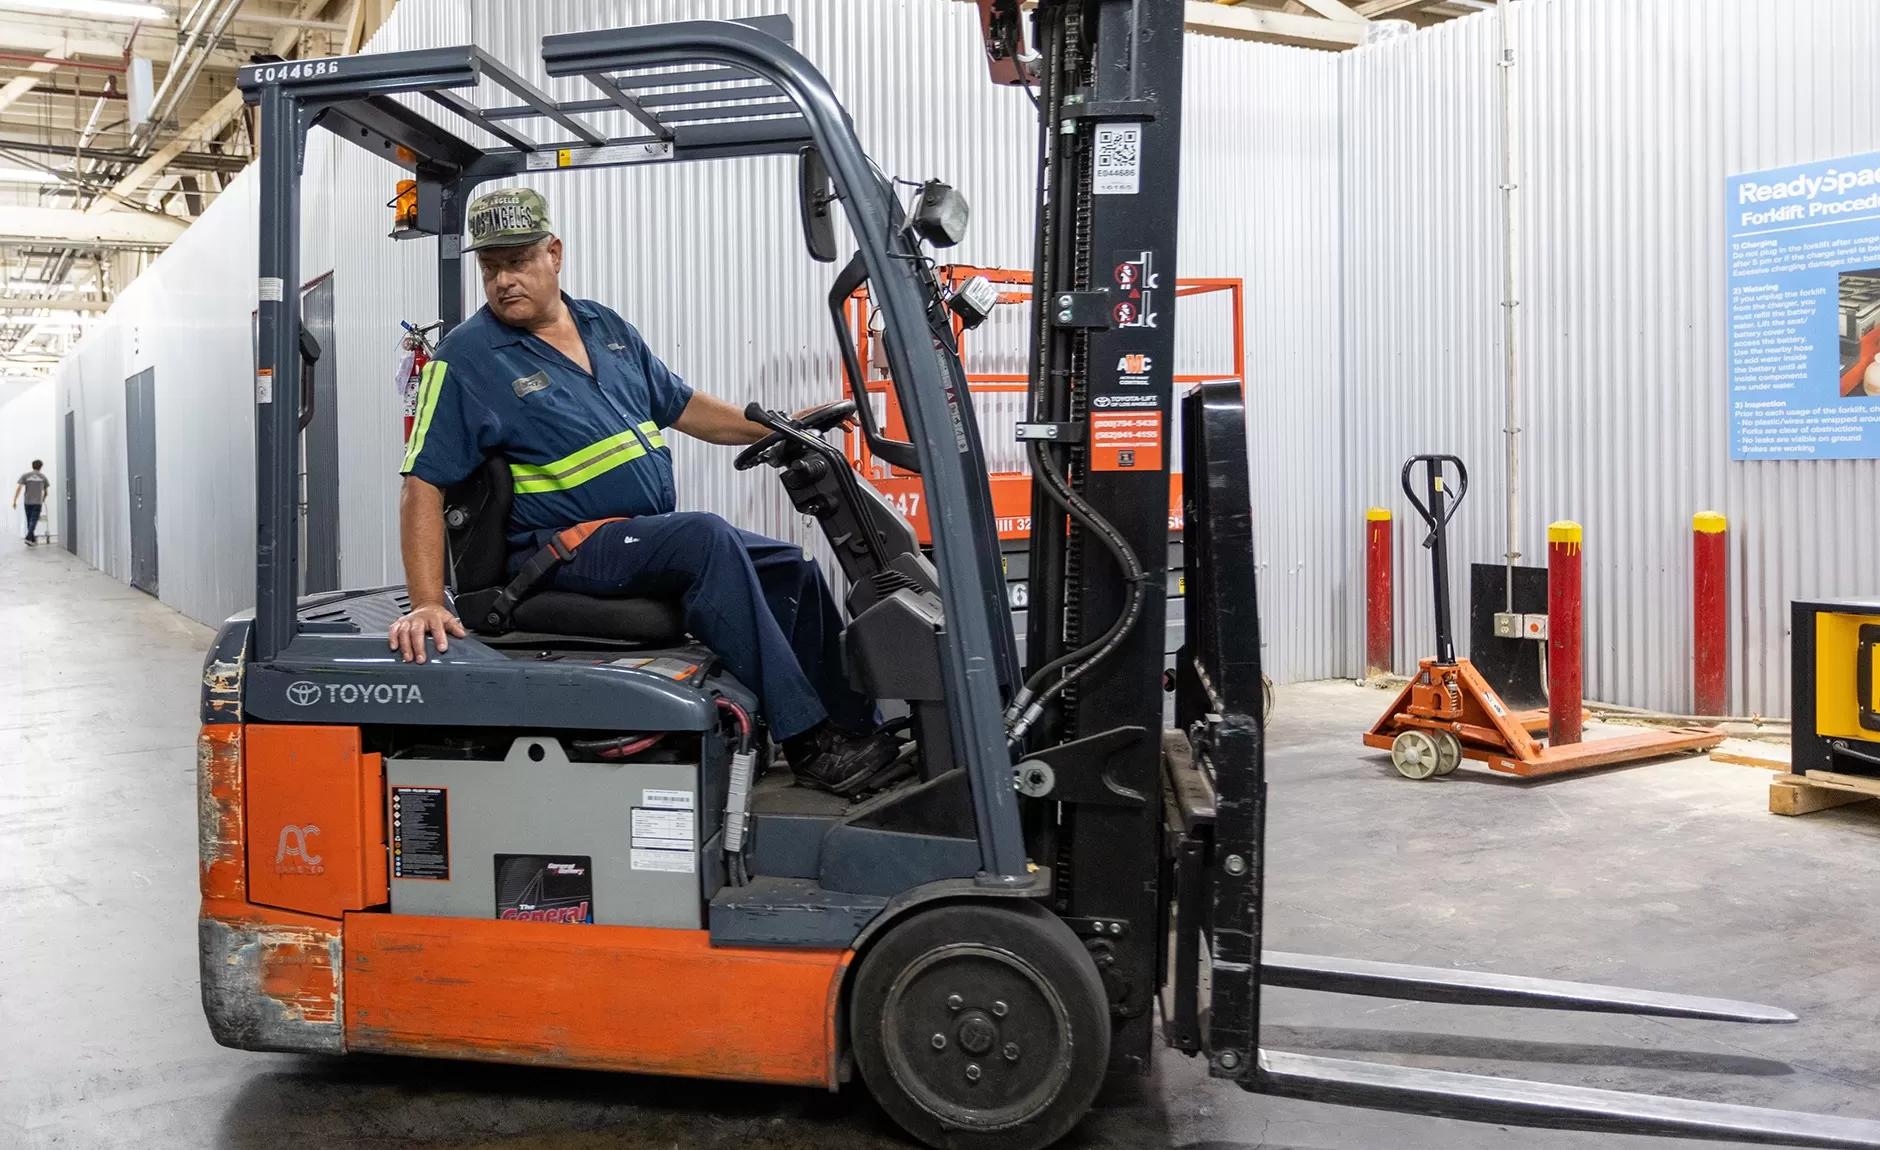 A man on a forklift in a warehouse.